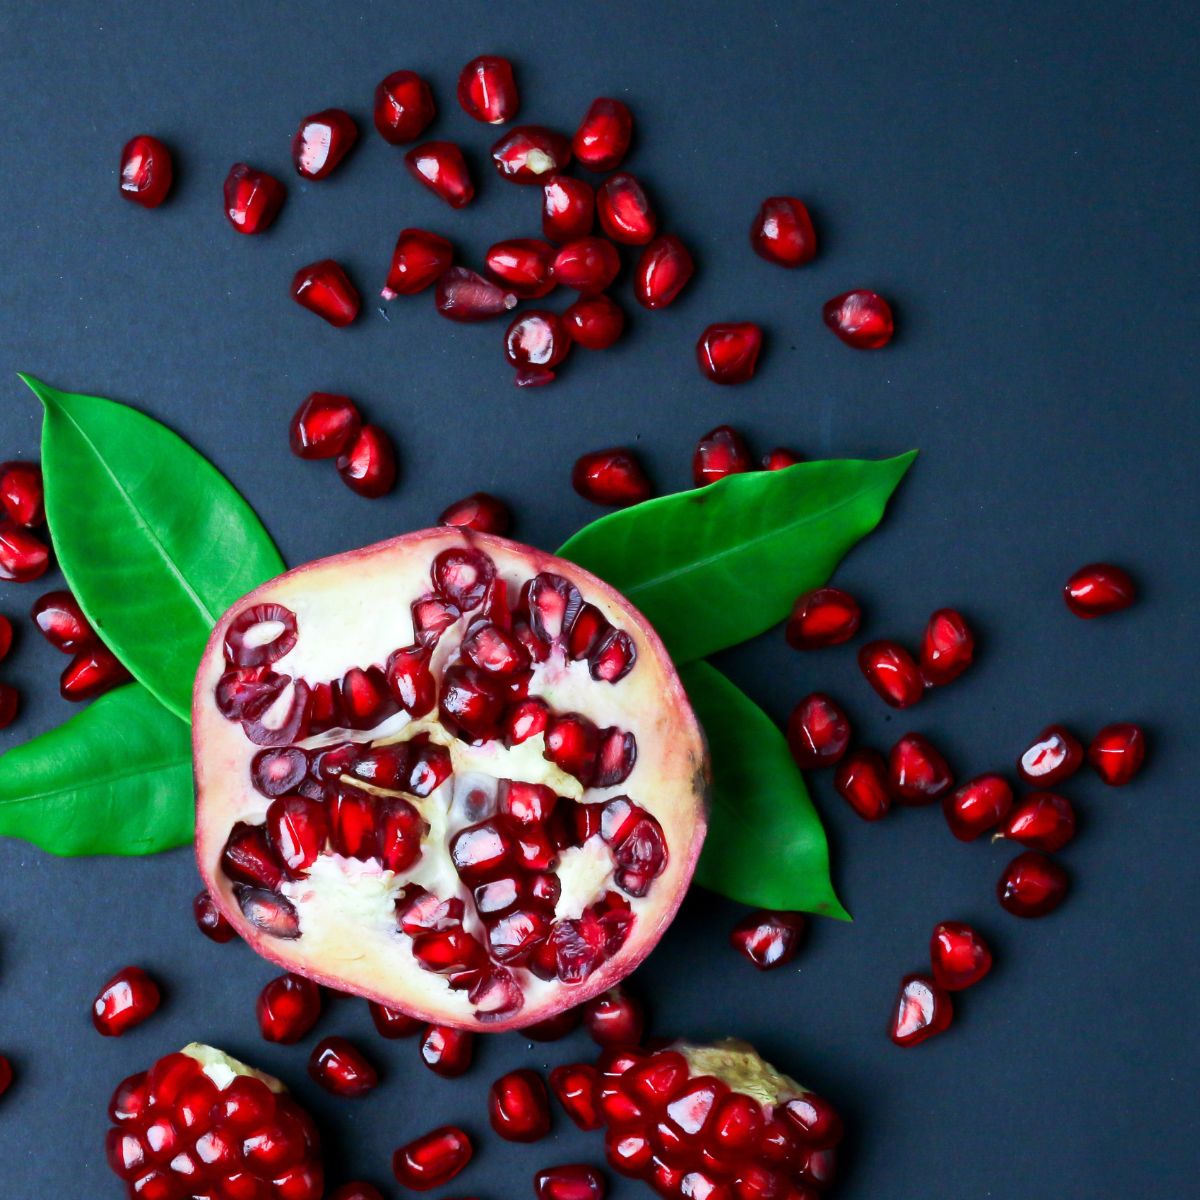 up close photo of pomegranate seeds, or arils